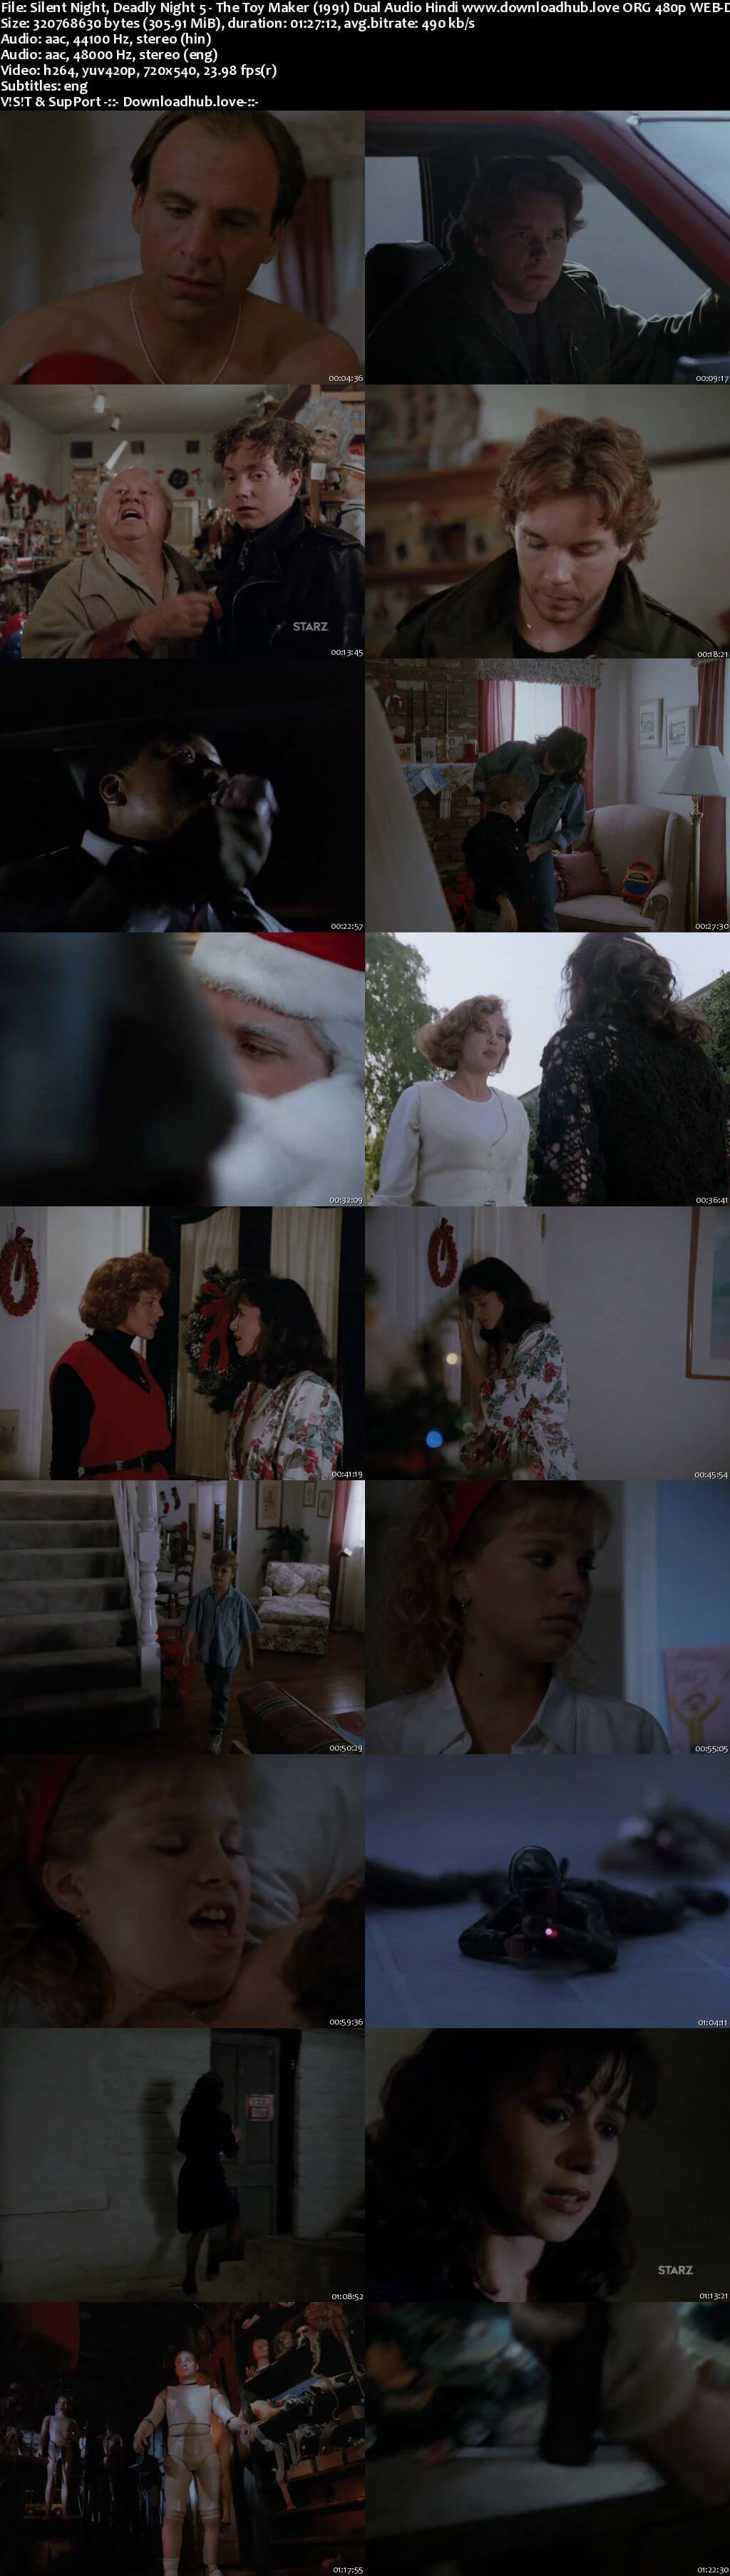 Silent Night, Deadly Night 5 The Toy Maker 1991 Hindi Dual Audio 300MB Web-DL 480p ESubs